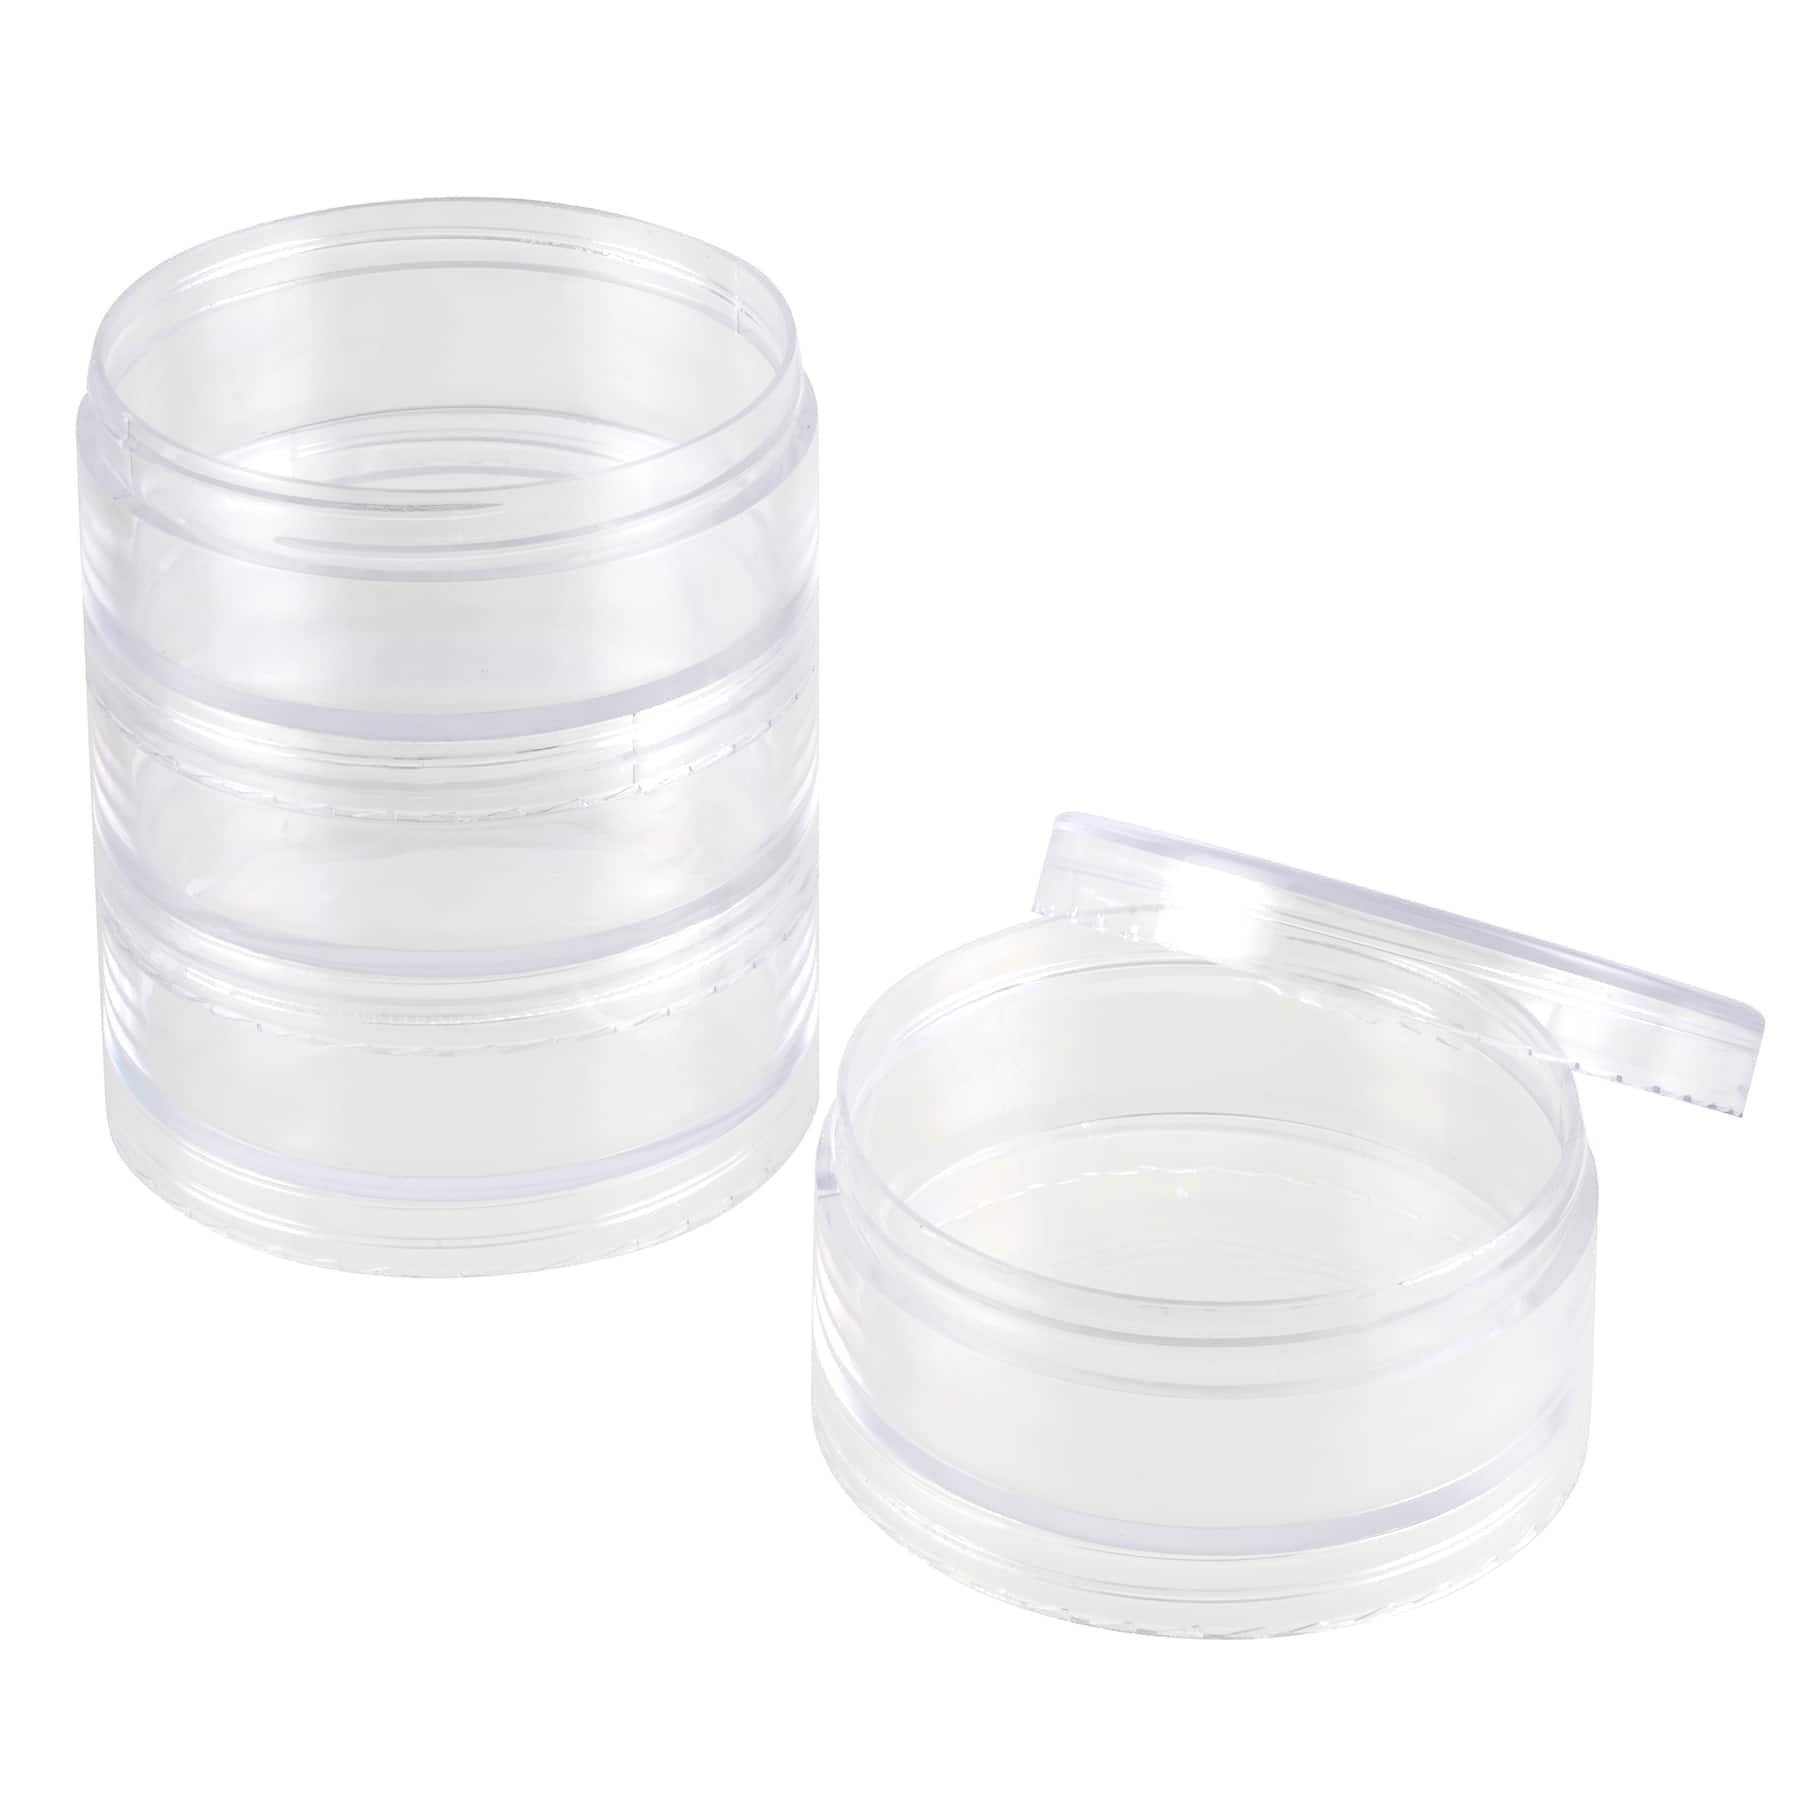 Round Clear Lidded Small Plastic Box Home Organizer Jewelry Beads Storage Boxes 